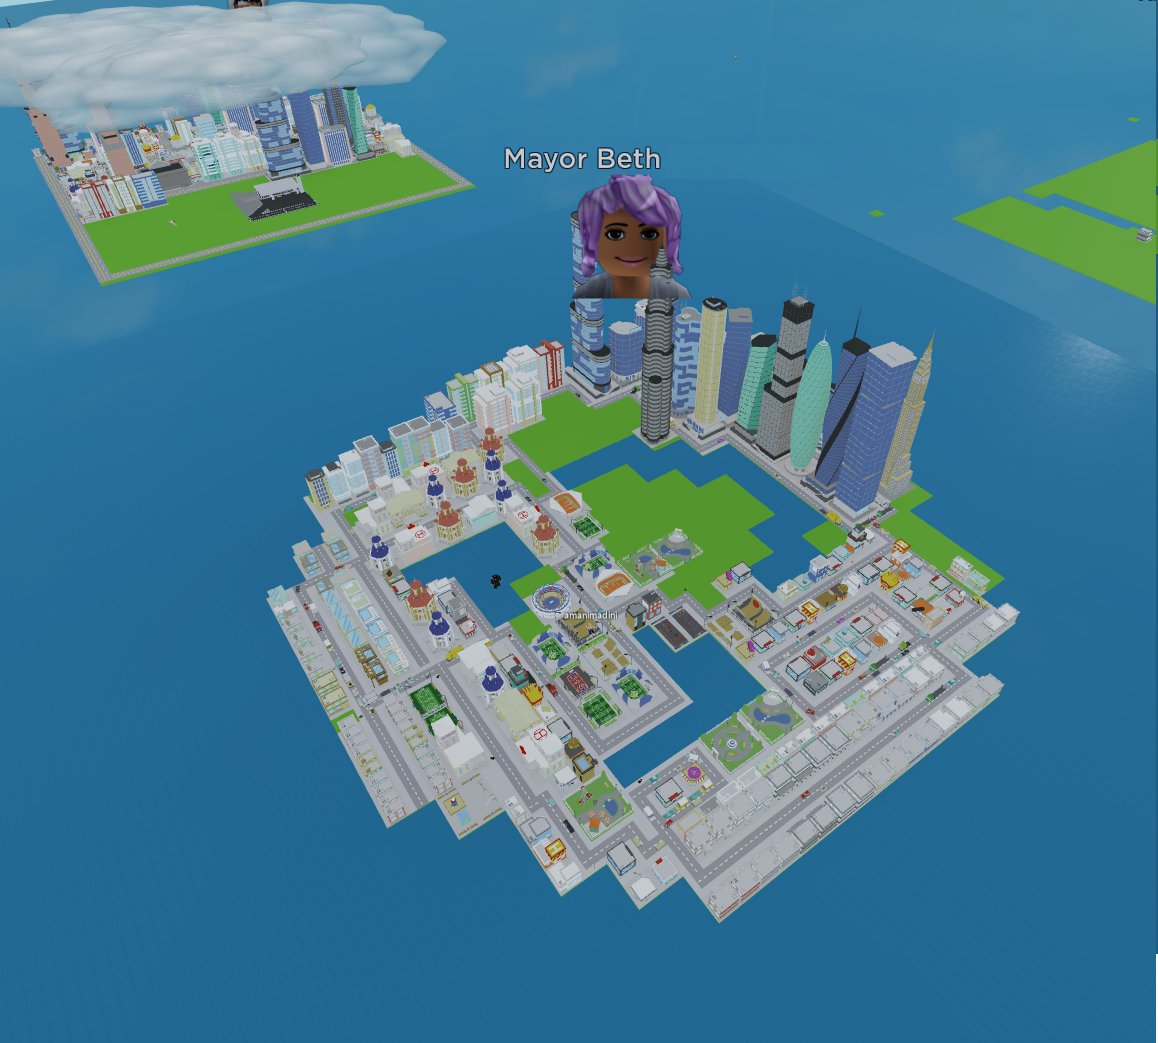 Great Scott Gaming On Twitter Wow Check Out Beth S City Just Found It And I Was Very Impressed Roblox Robloxdev Game Https T Co 2h9bp9vjpq Https T Co Cutmixie9e - town mayor roblox